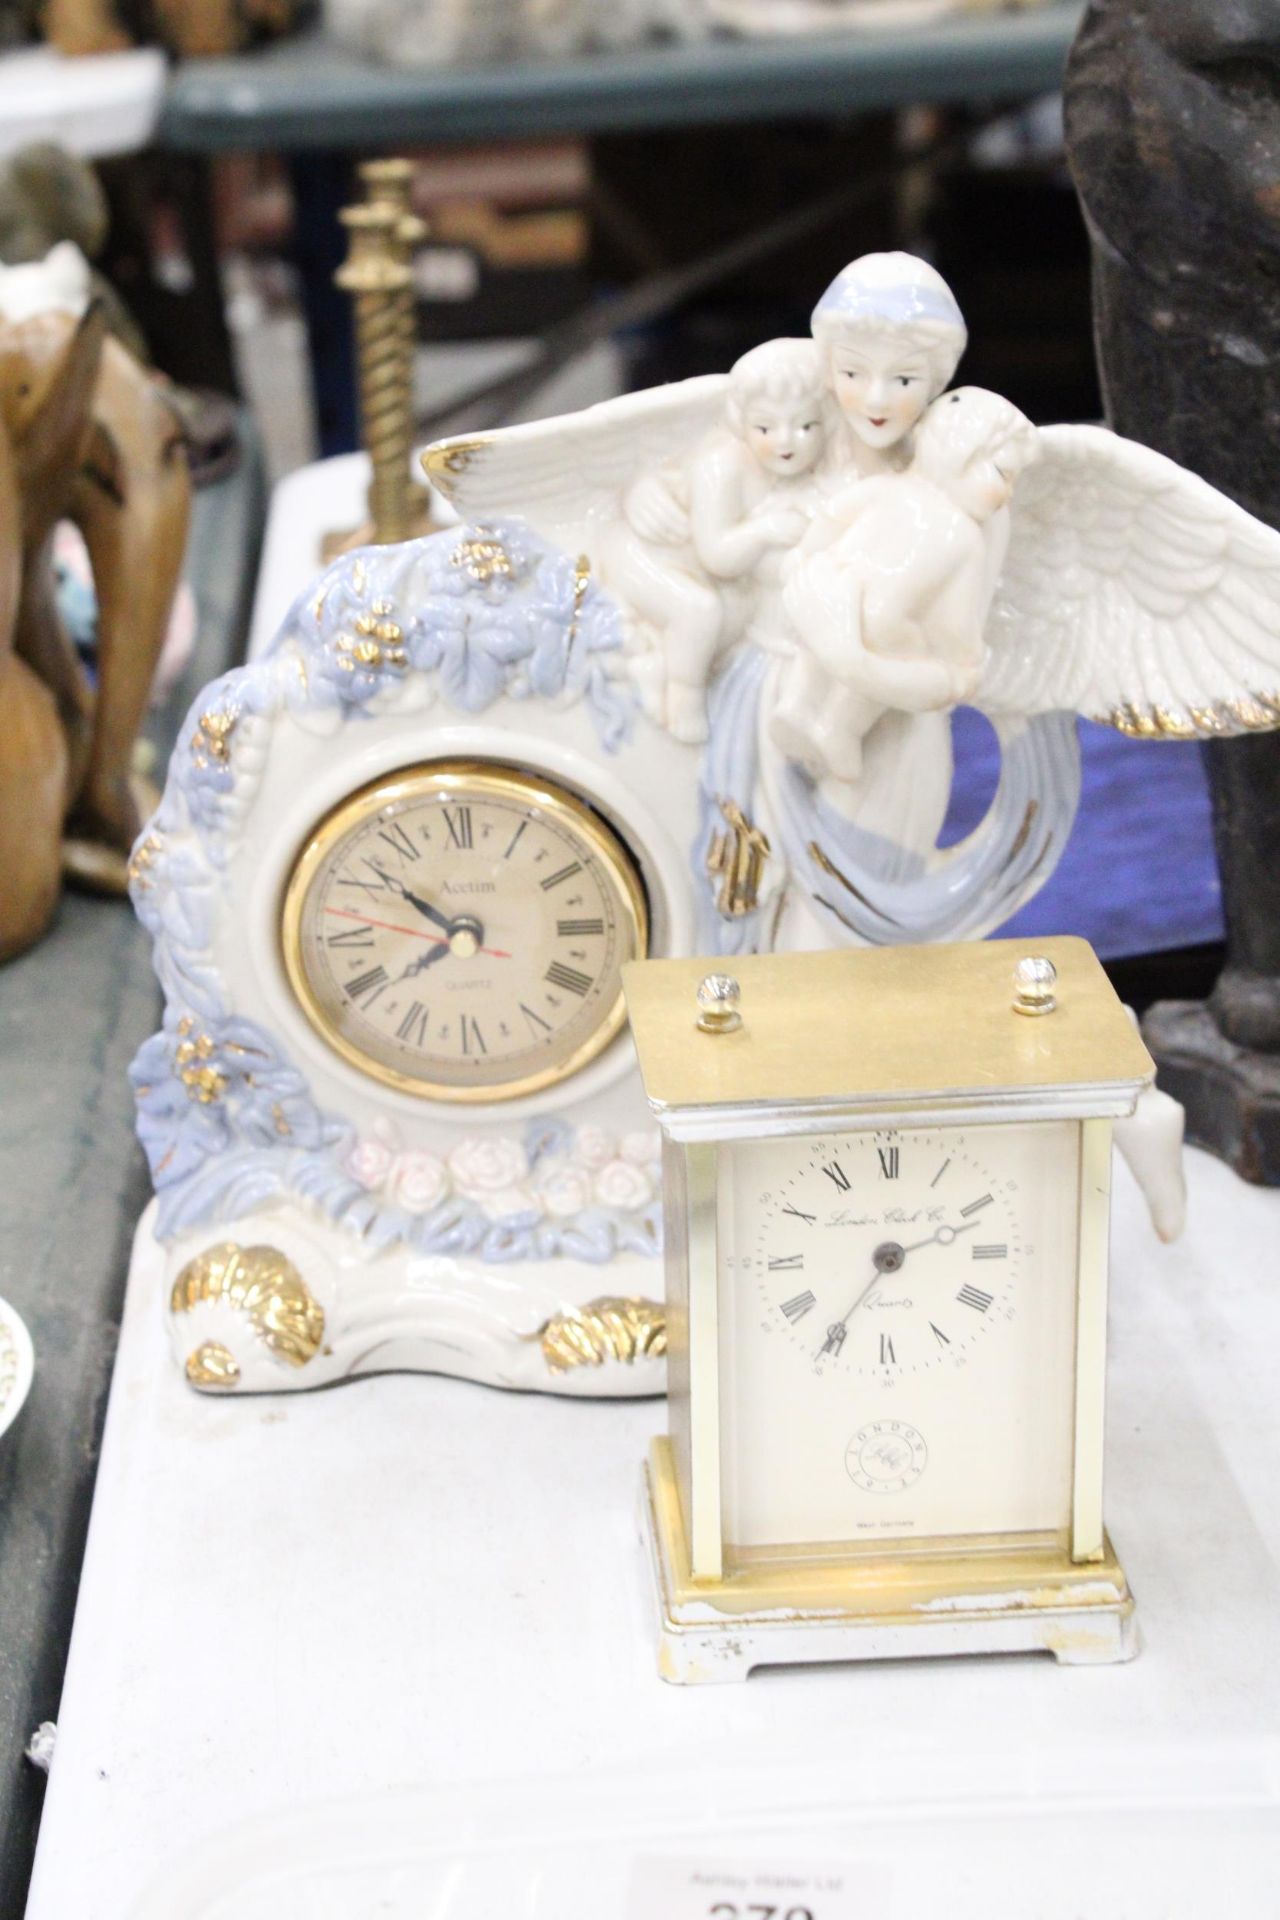 TWO MANTLE CLOCKS TO INCLUDE A CERAMIC ANGEL WITH CHILDREN, PLUS A CARRIAGE CLOCK